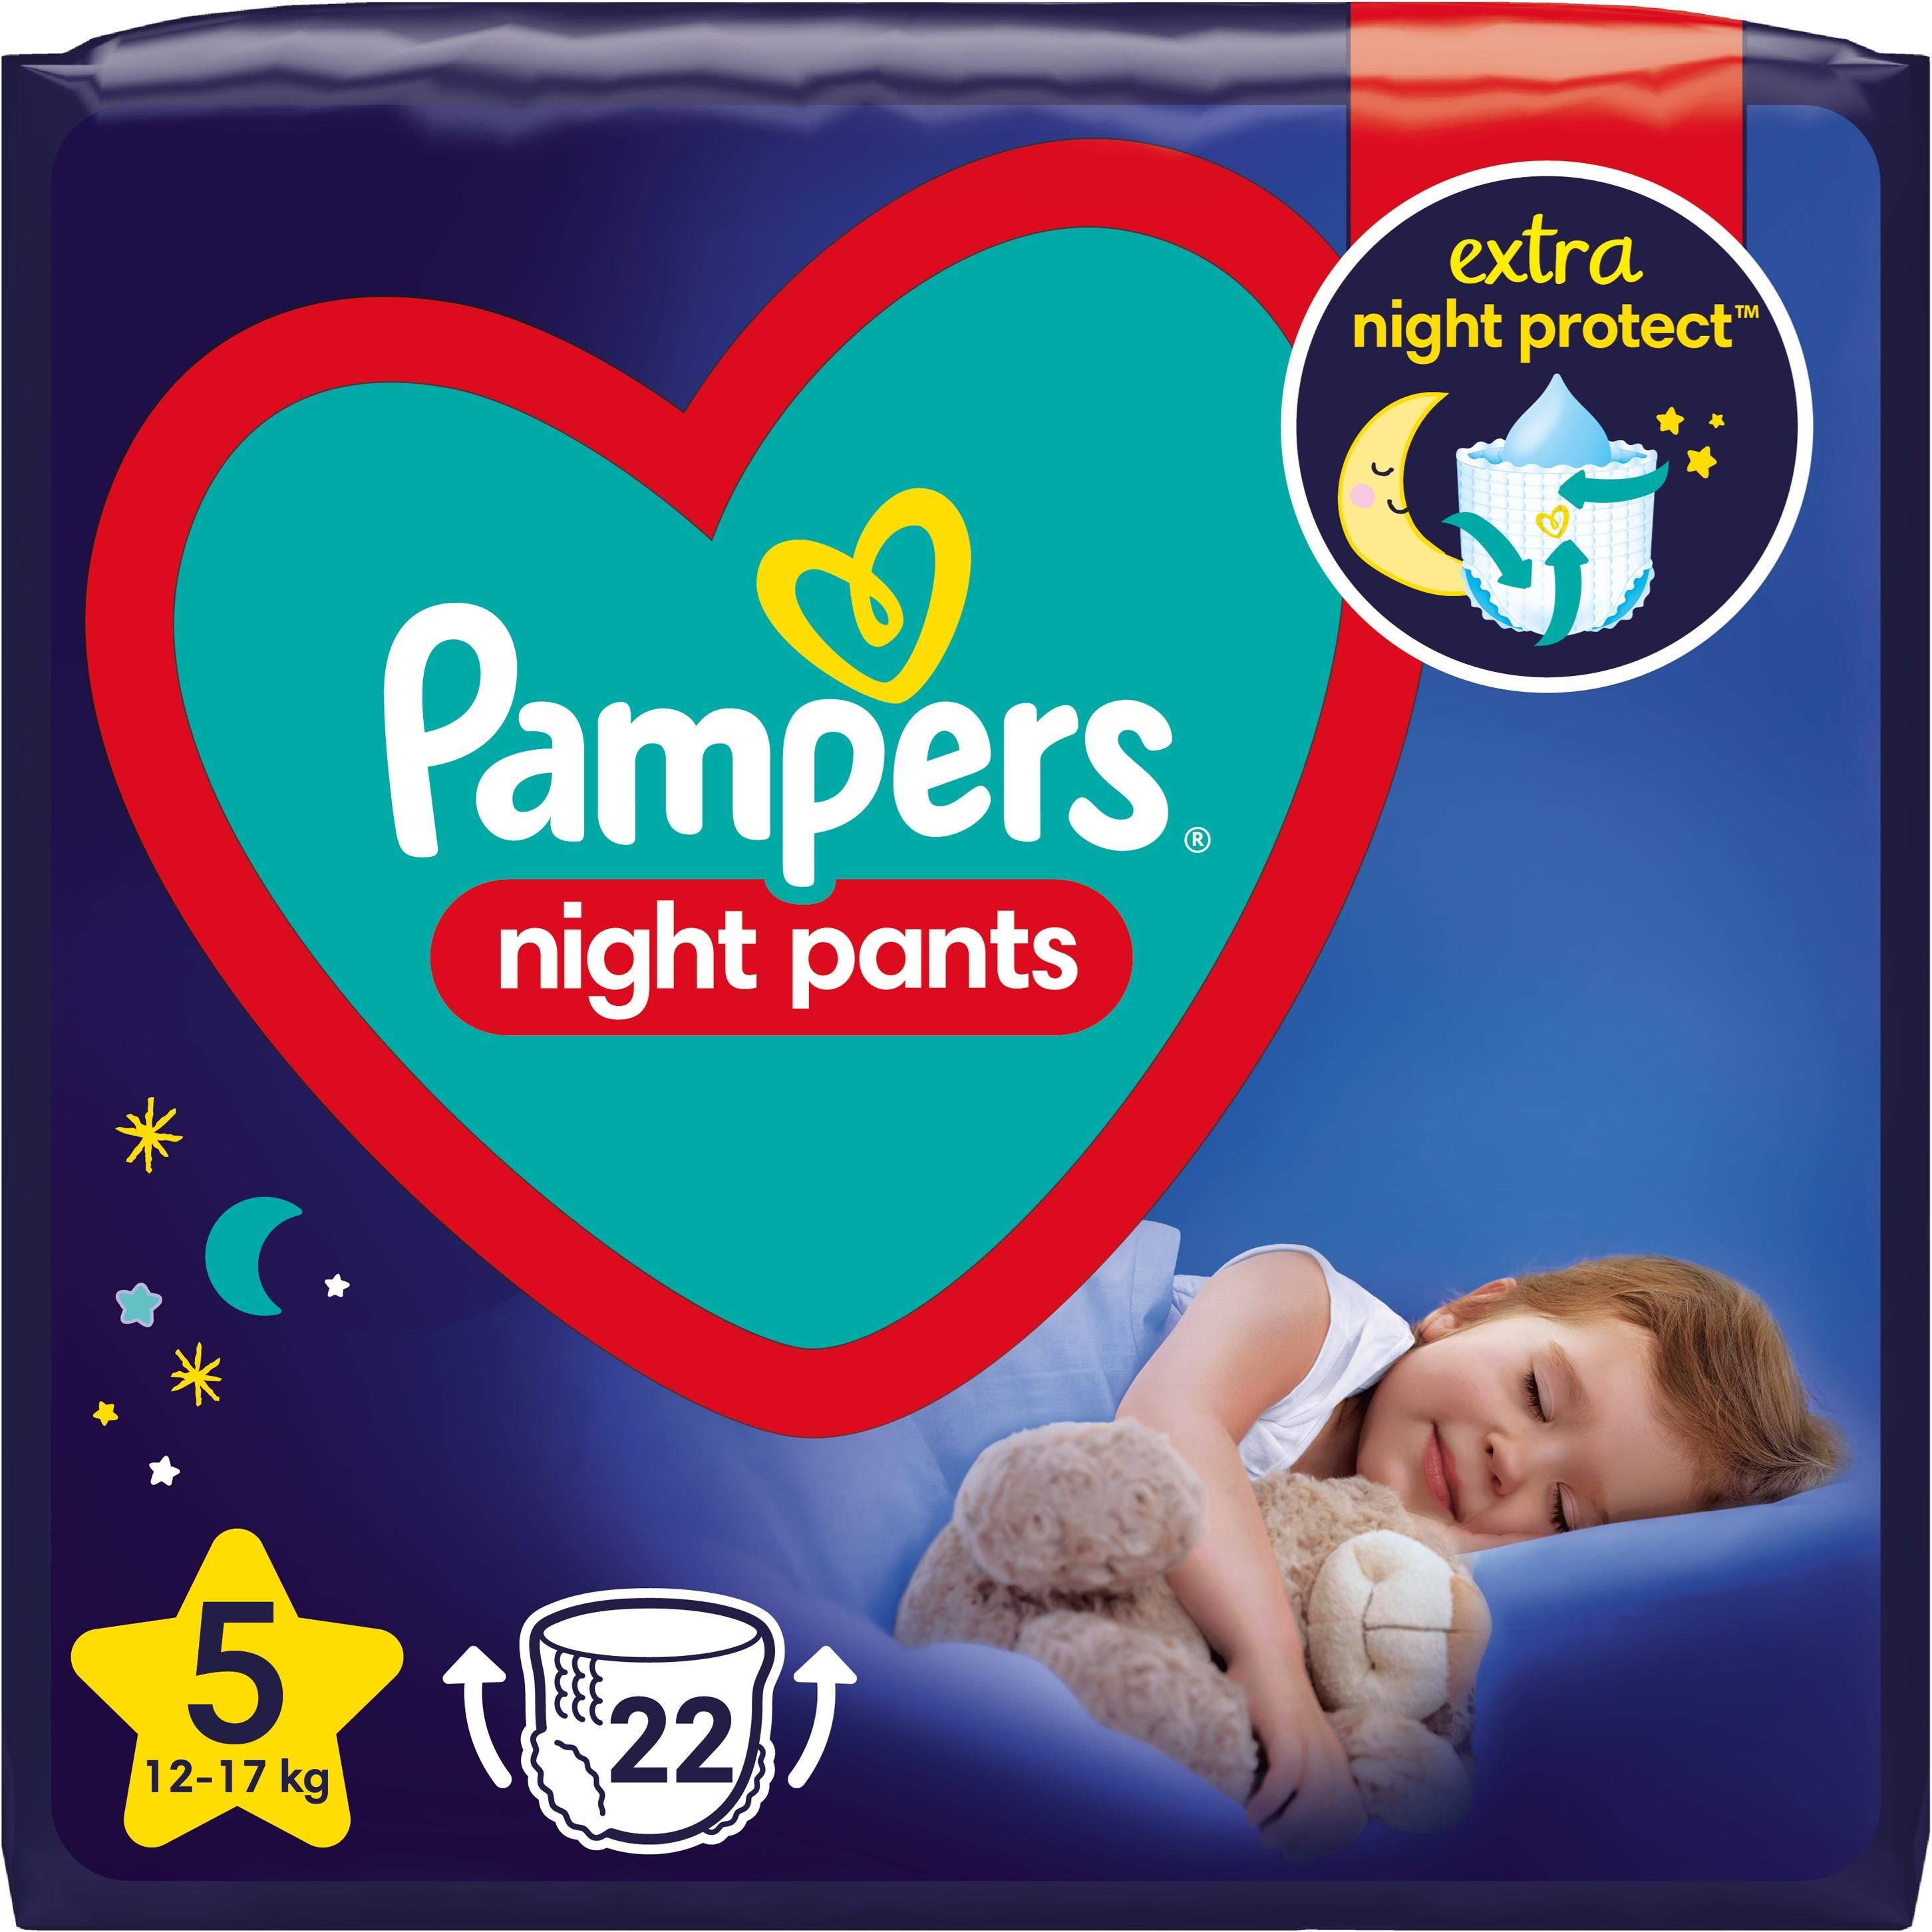 shopee pampers